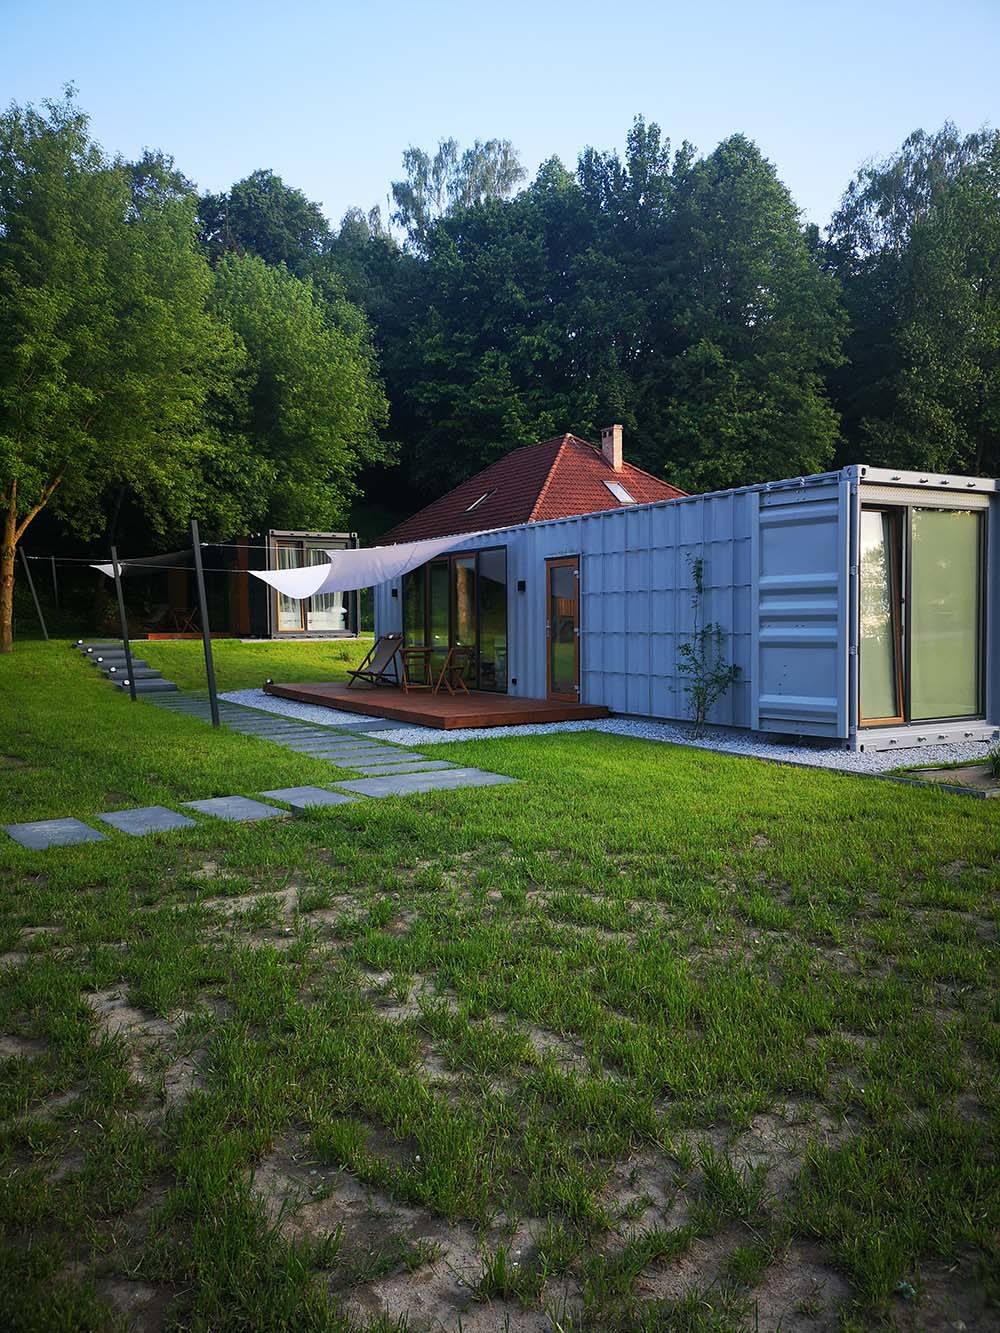 Move-in ready shipping container home for sale in Belgium